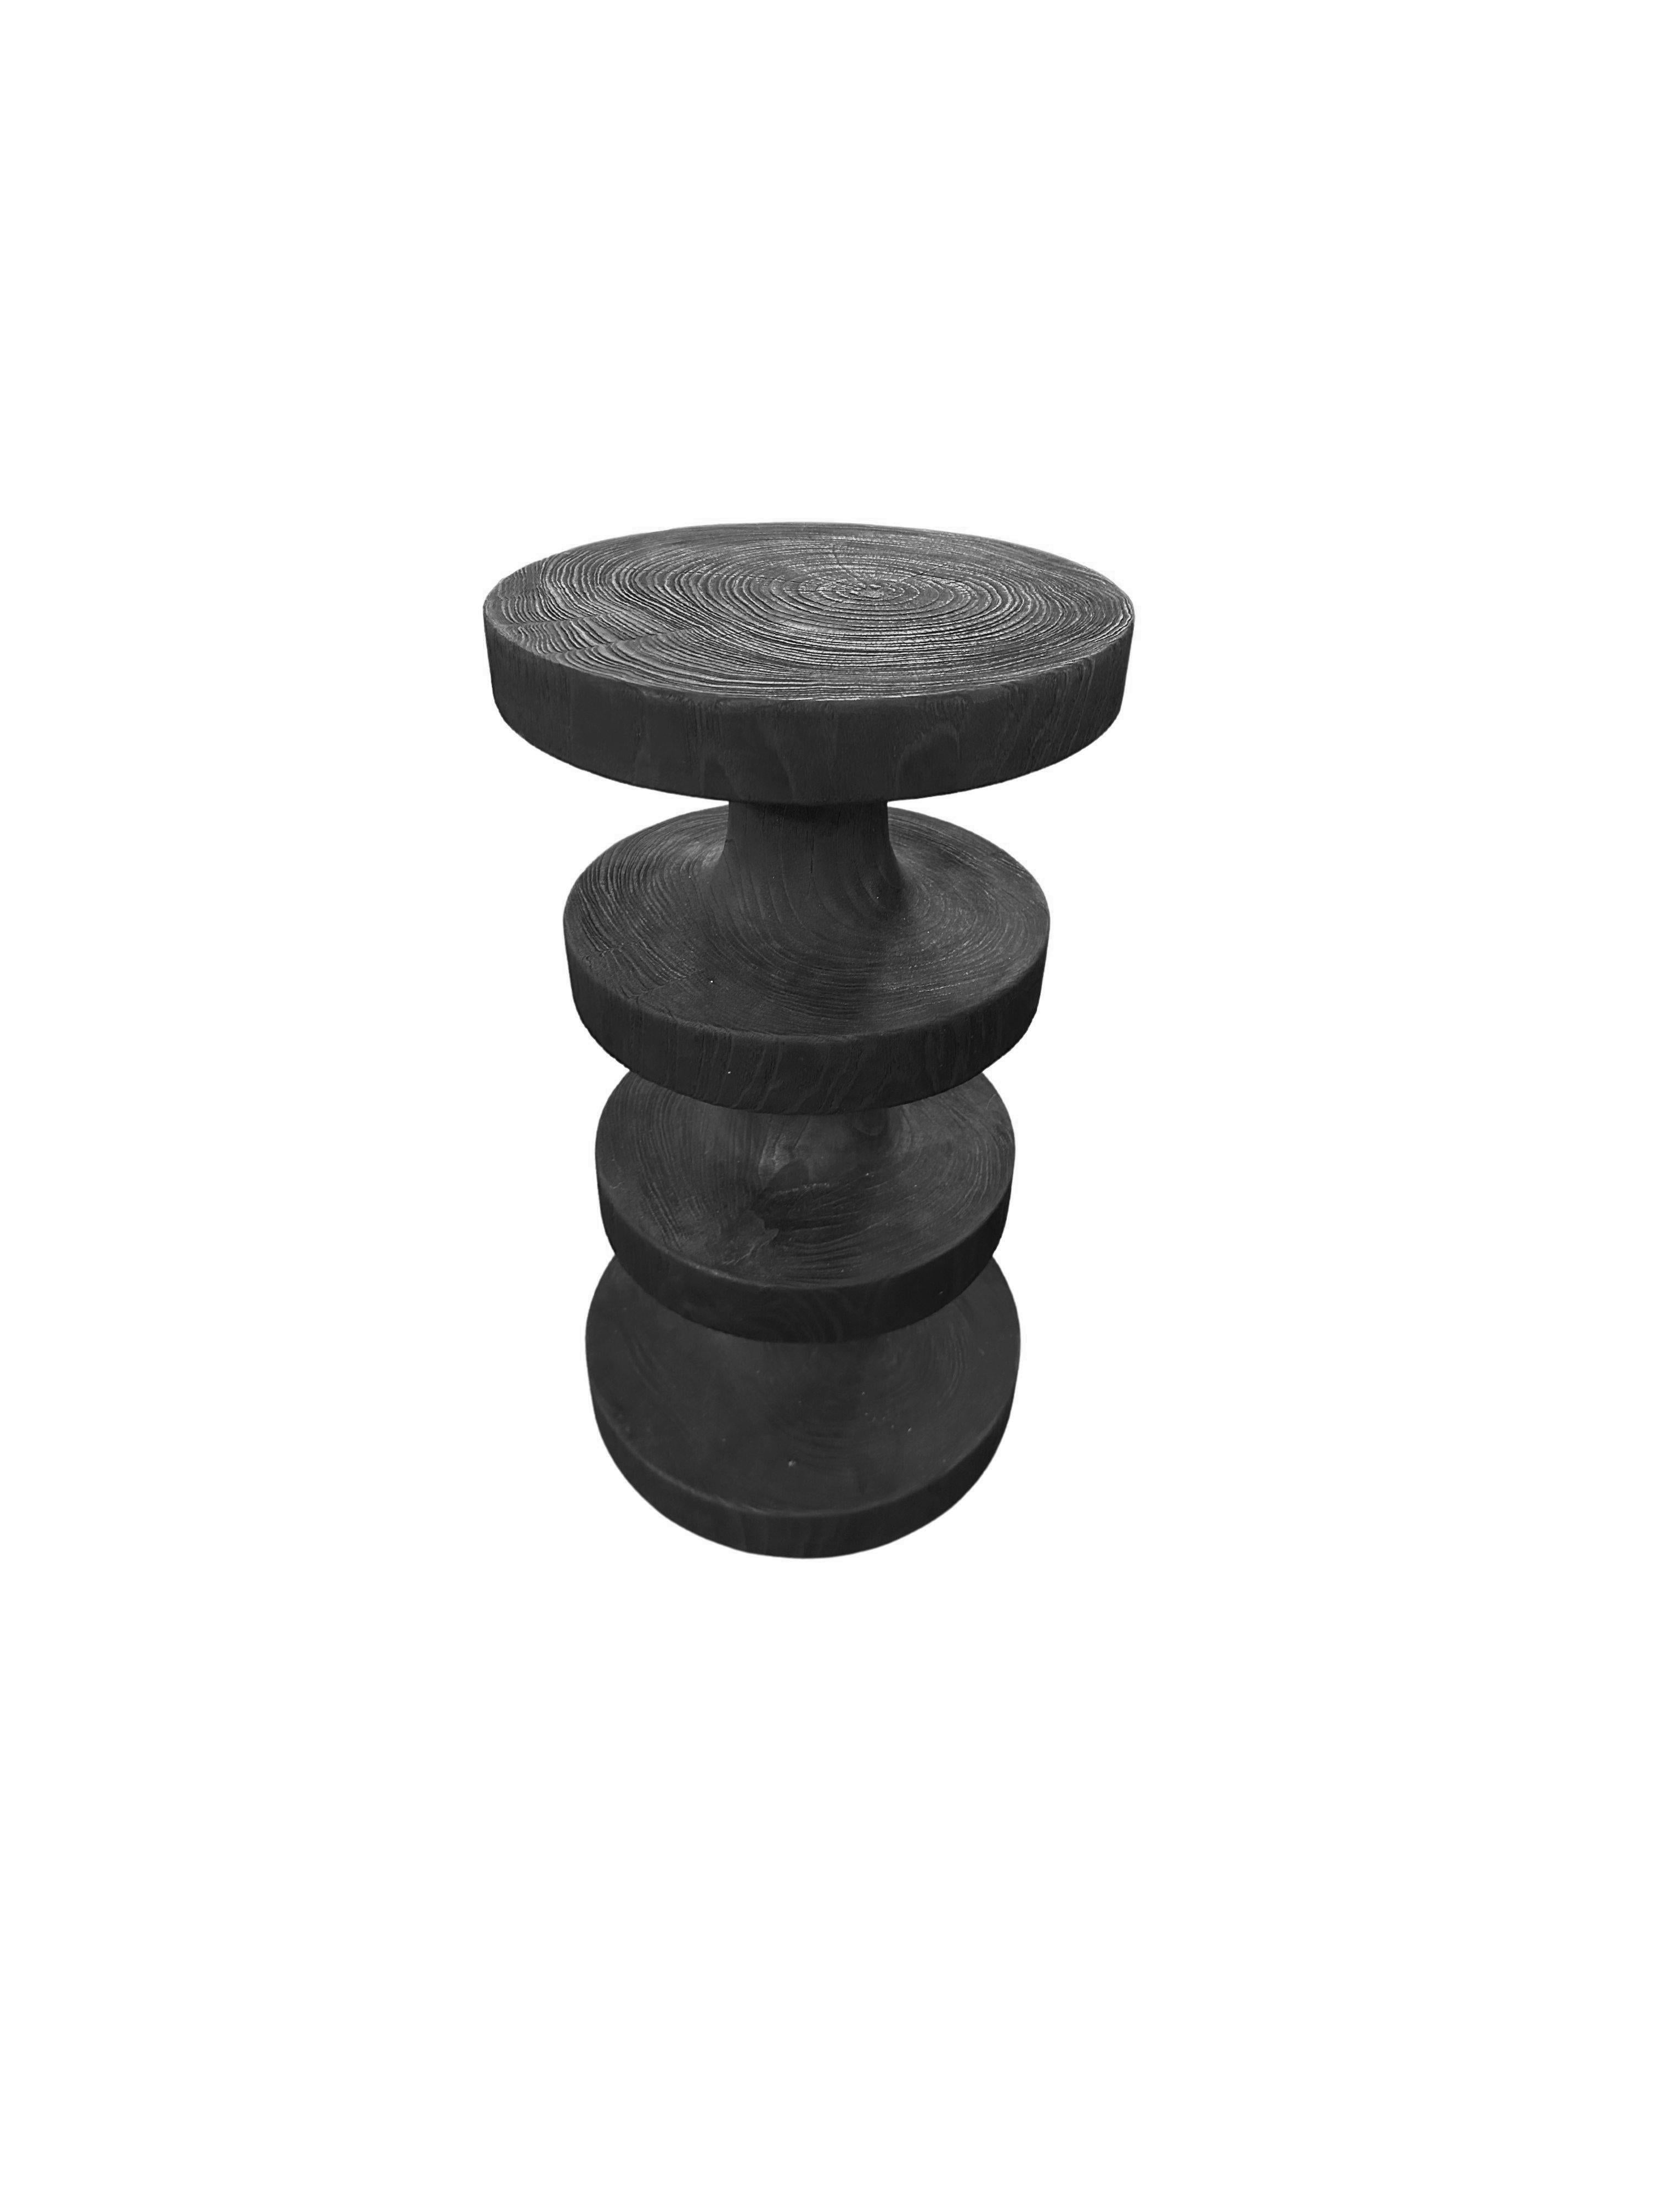 A wonderfully sculptural stool with mix of wood textures and shades. A uniquely sculptural and versatile piece, this stool was crafted from a single block of teak wood and has a smooth texture. Meticulously carved, sanded and smoothed to the perfect